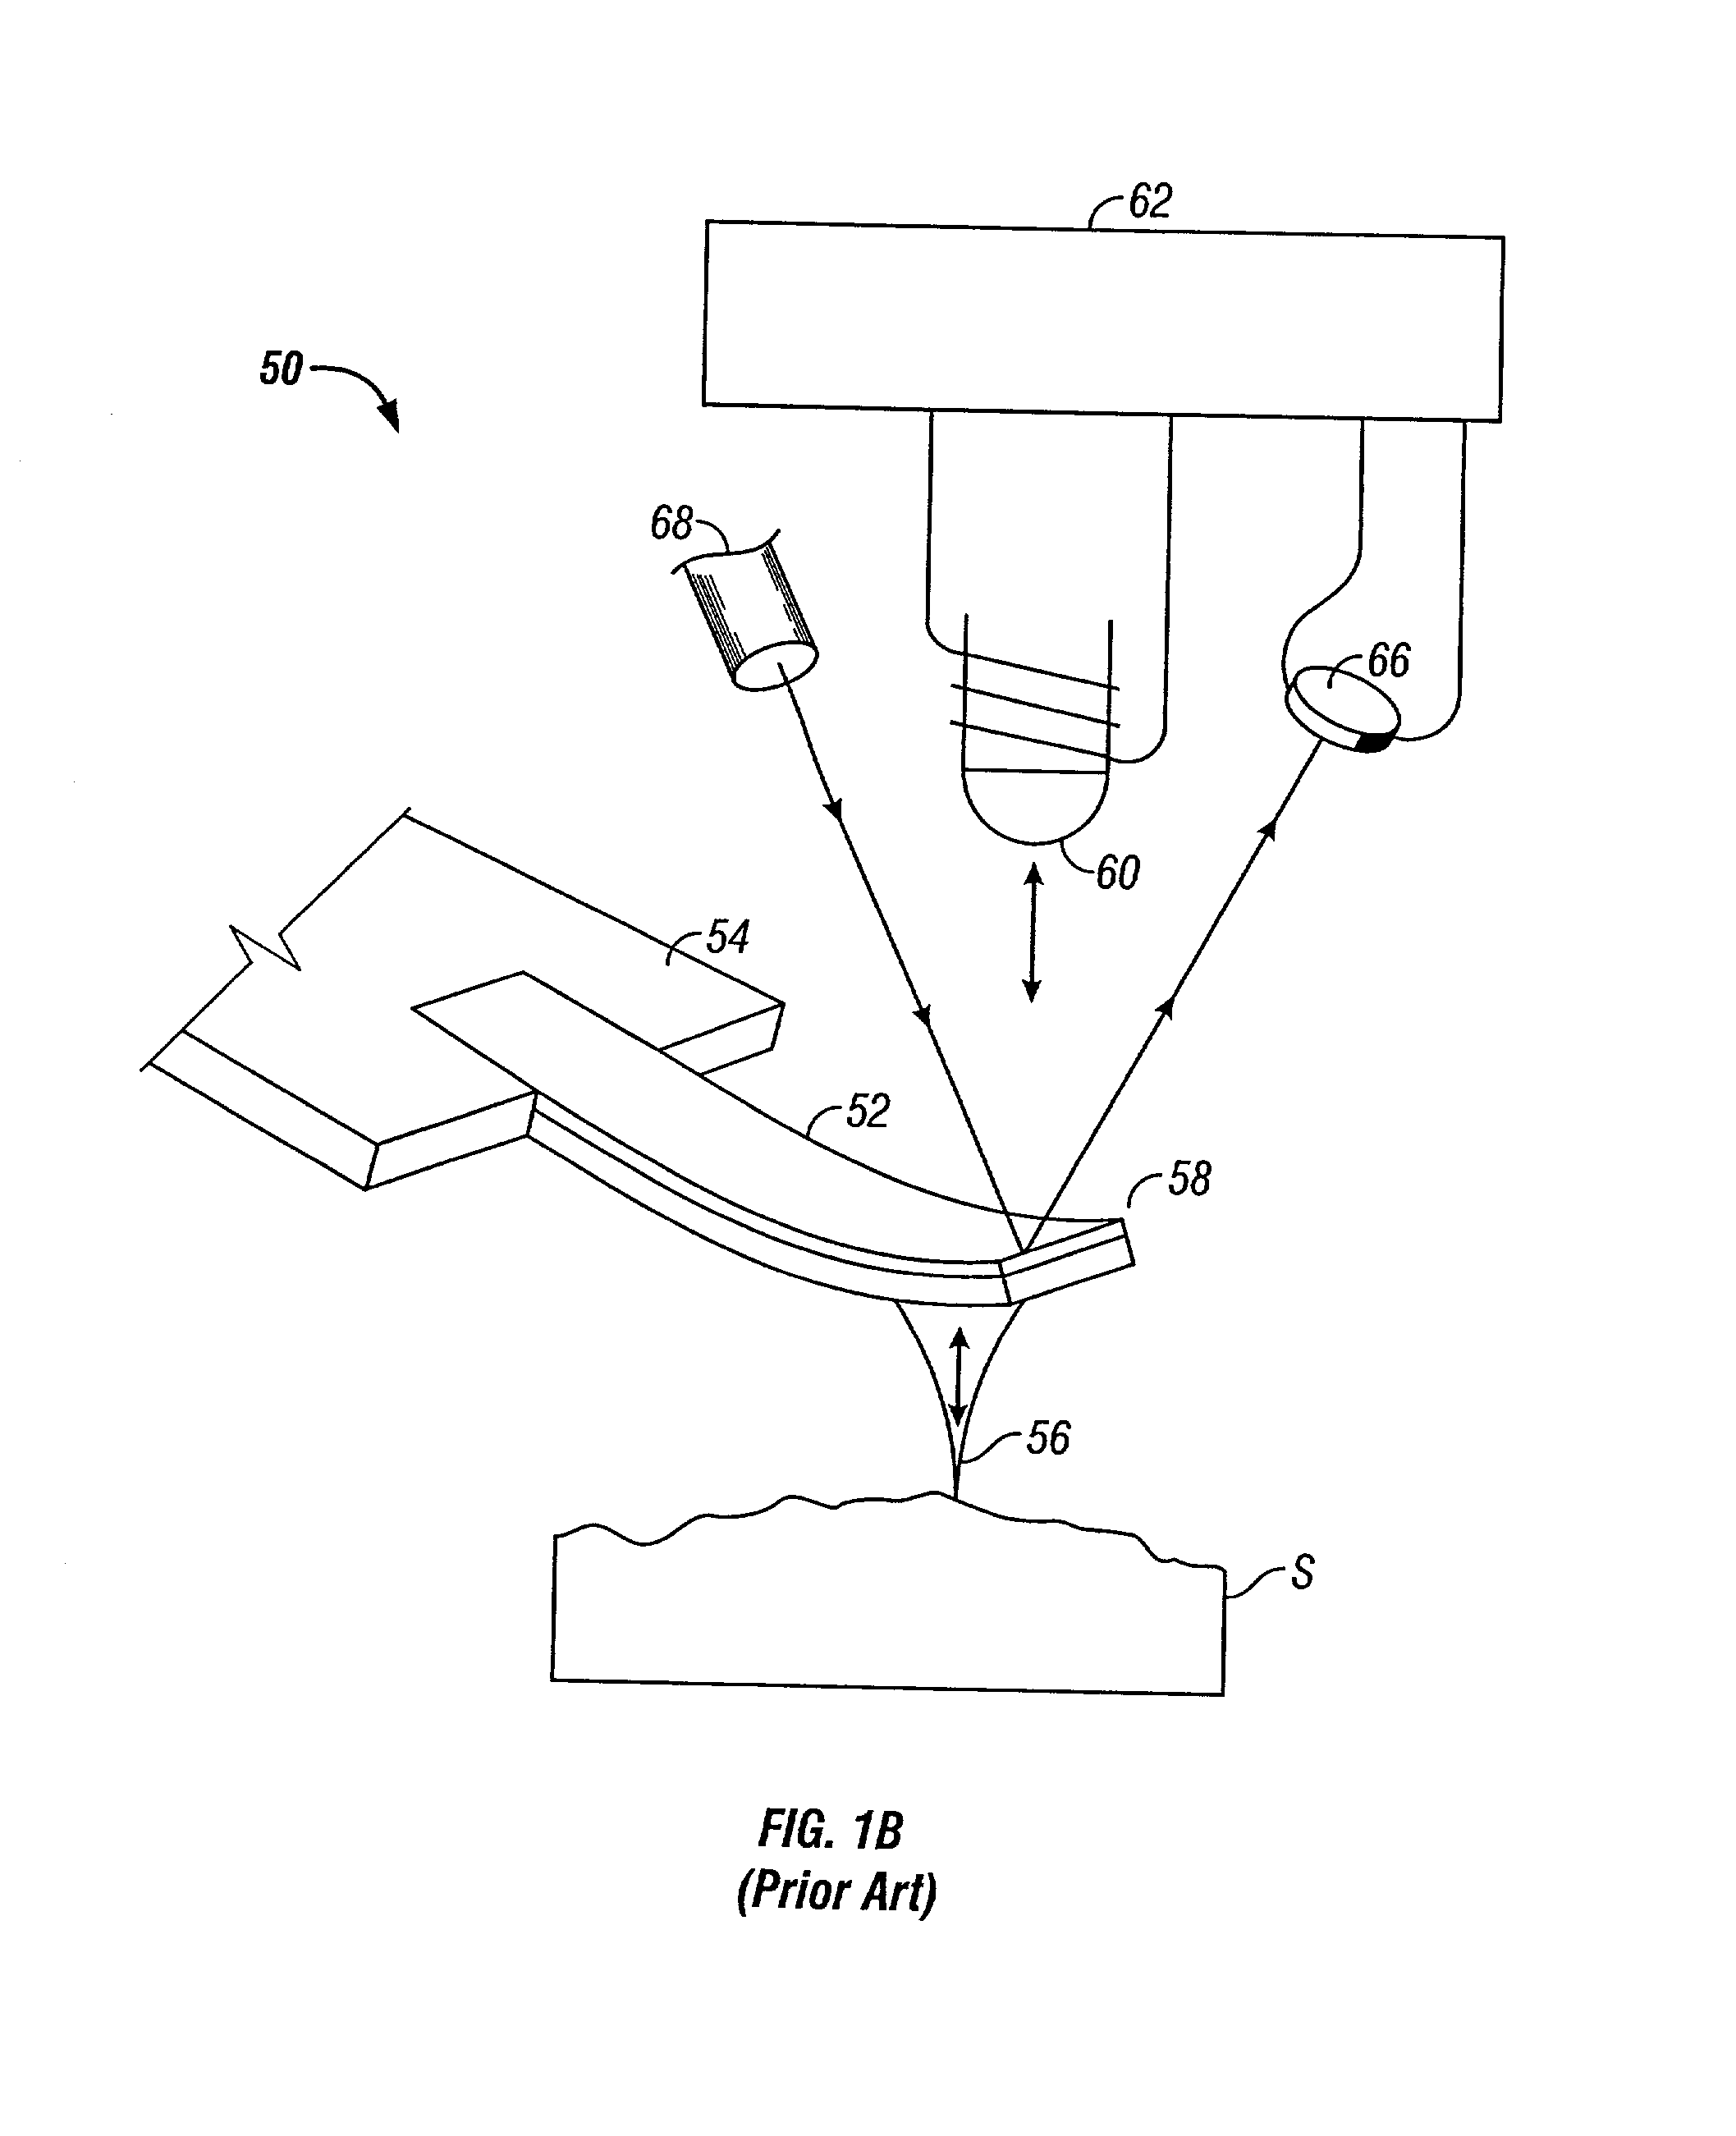 Method and apparatus for the ultrasonic actuation of the cantilever of a probe-based instrument